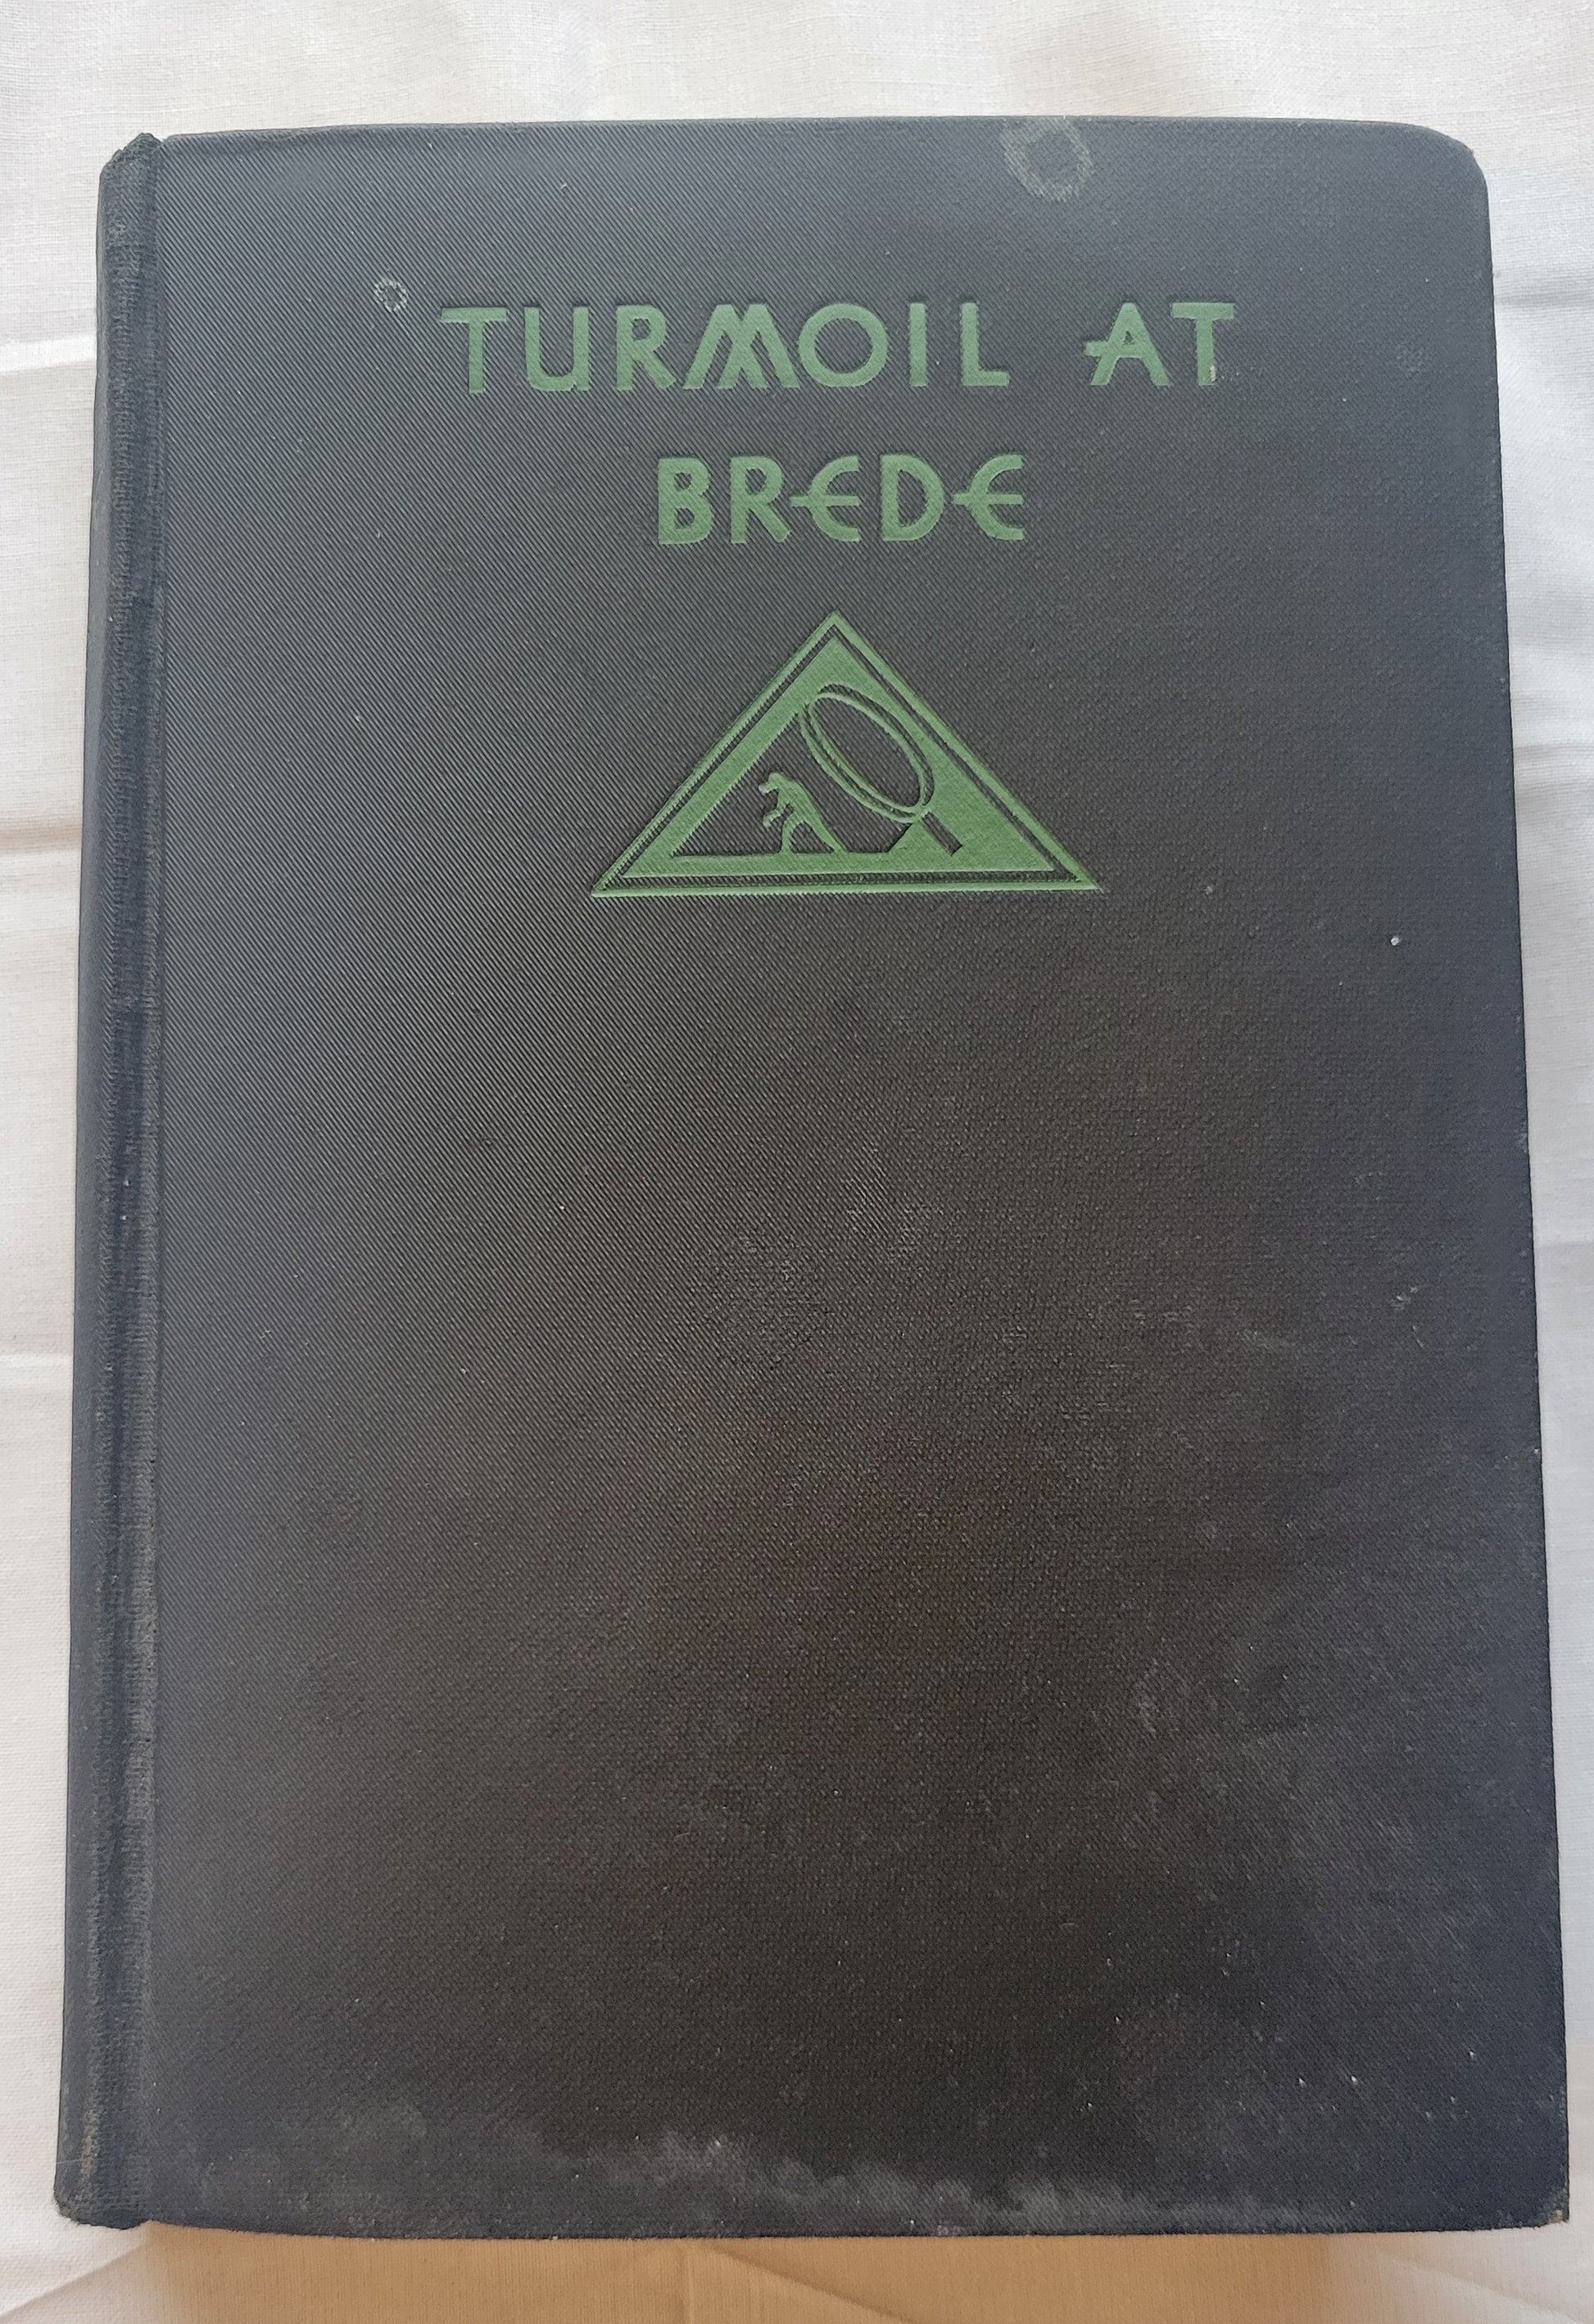 Antique book for sale “Turmoil at Brede, First Edition” by Seldon Truss, published by The Mystery League in 1931. Front cover.